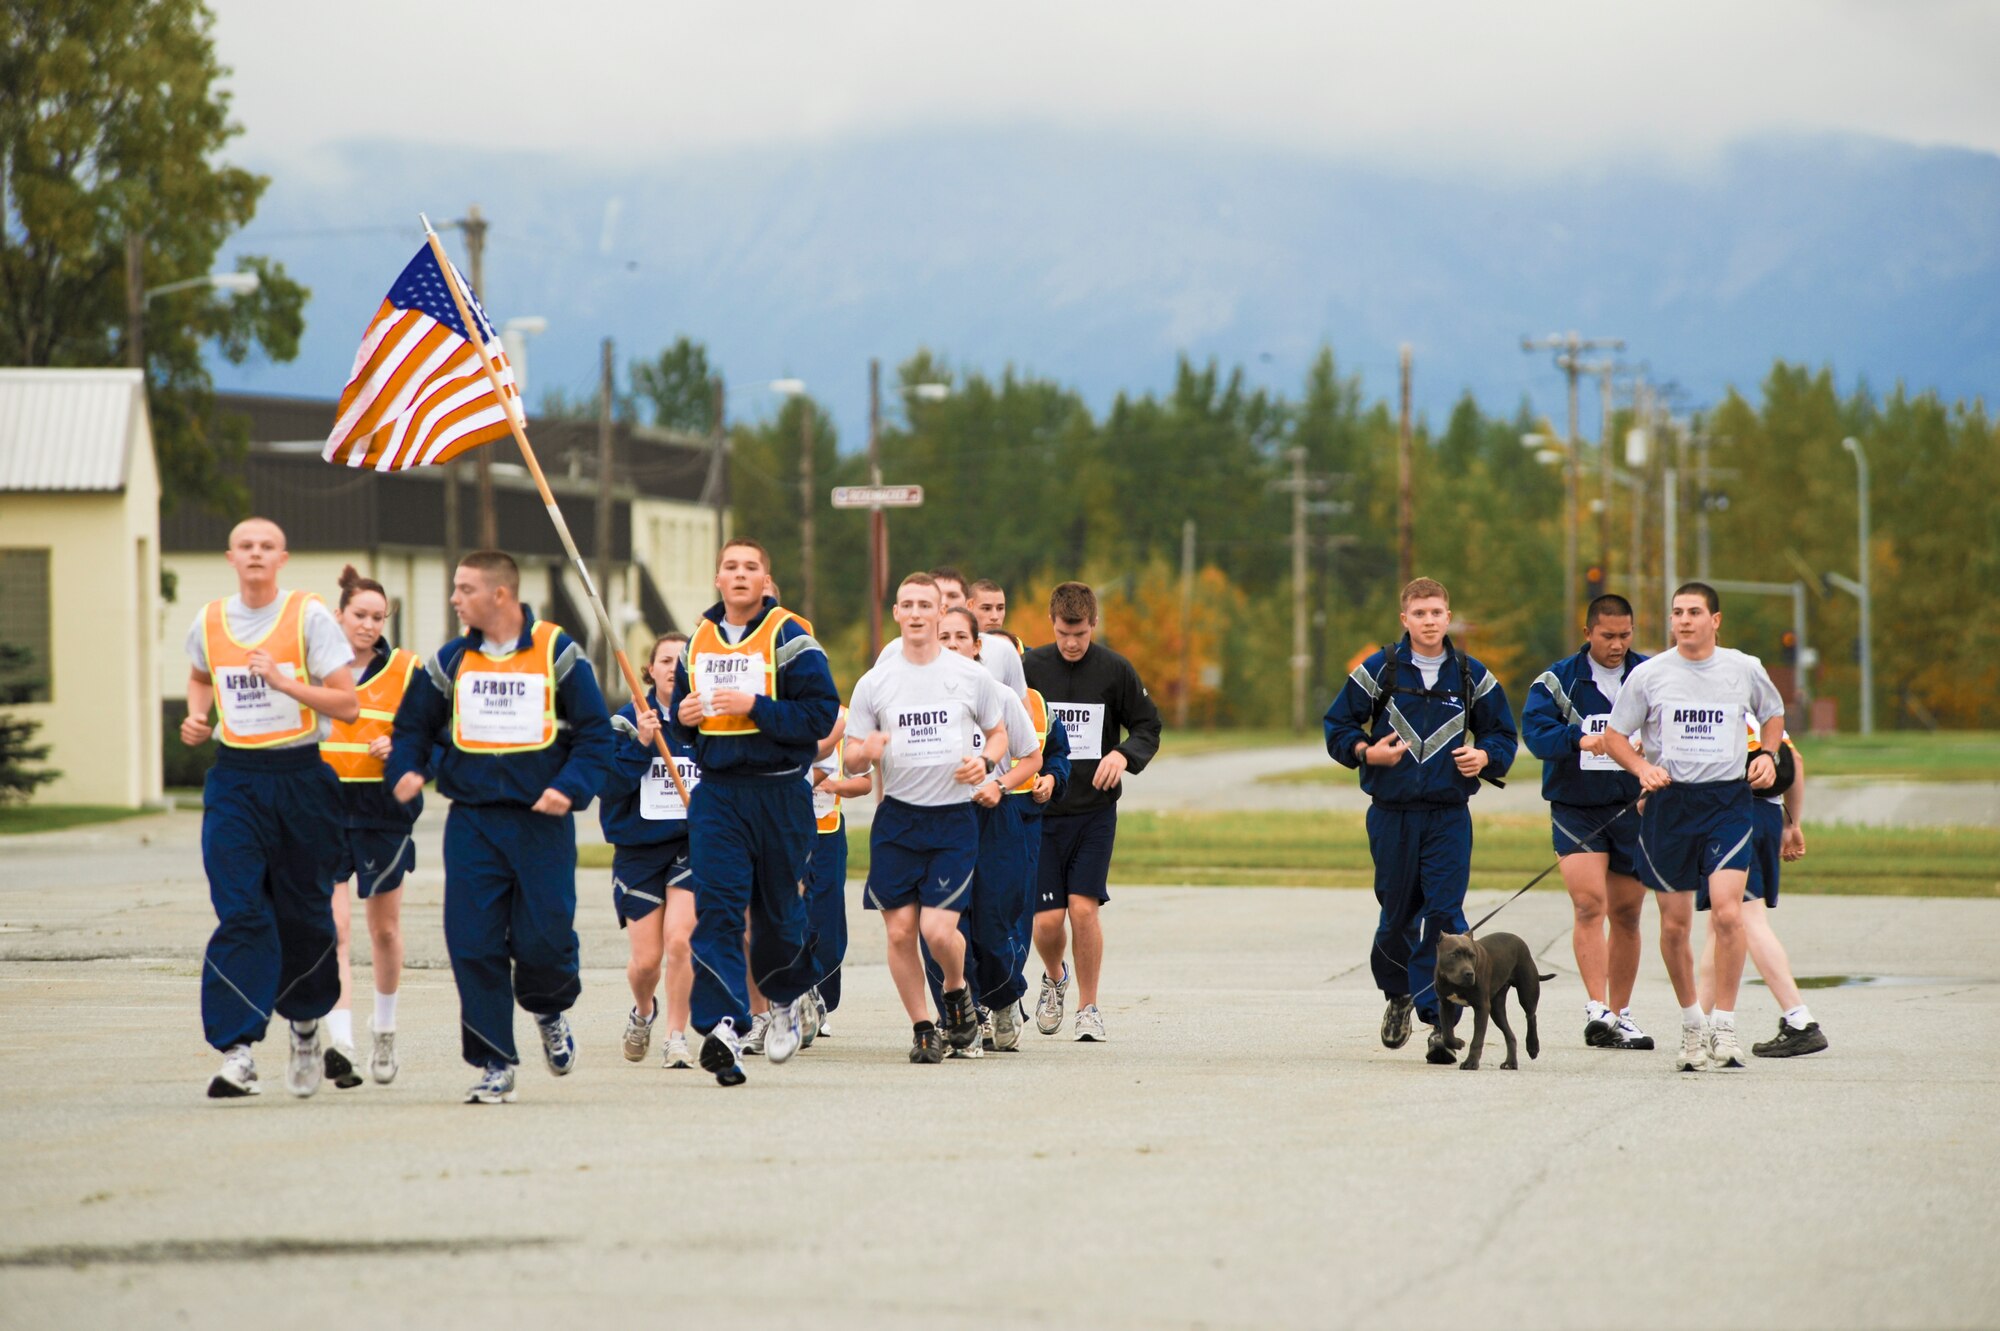 ELMENDORF AIR FORCE BASE Alaska?Air Force Cadets from the University of Alaska, Anchorage run their 9-11 run Sept. 13. The run was organized to show support of the Armed Forces fighting terrorism and in remembrance 9-11. The run lasted 24 hours with nearly 100 runners taking shifts of 30 minutes. (U.S. Air Force photo/Senior Airman Matthew Owens)